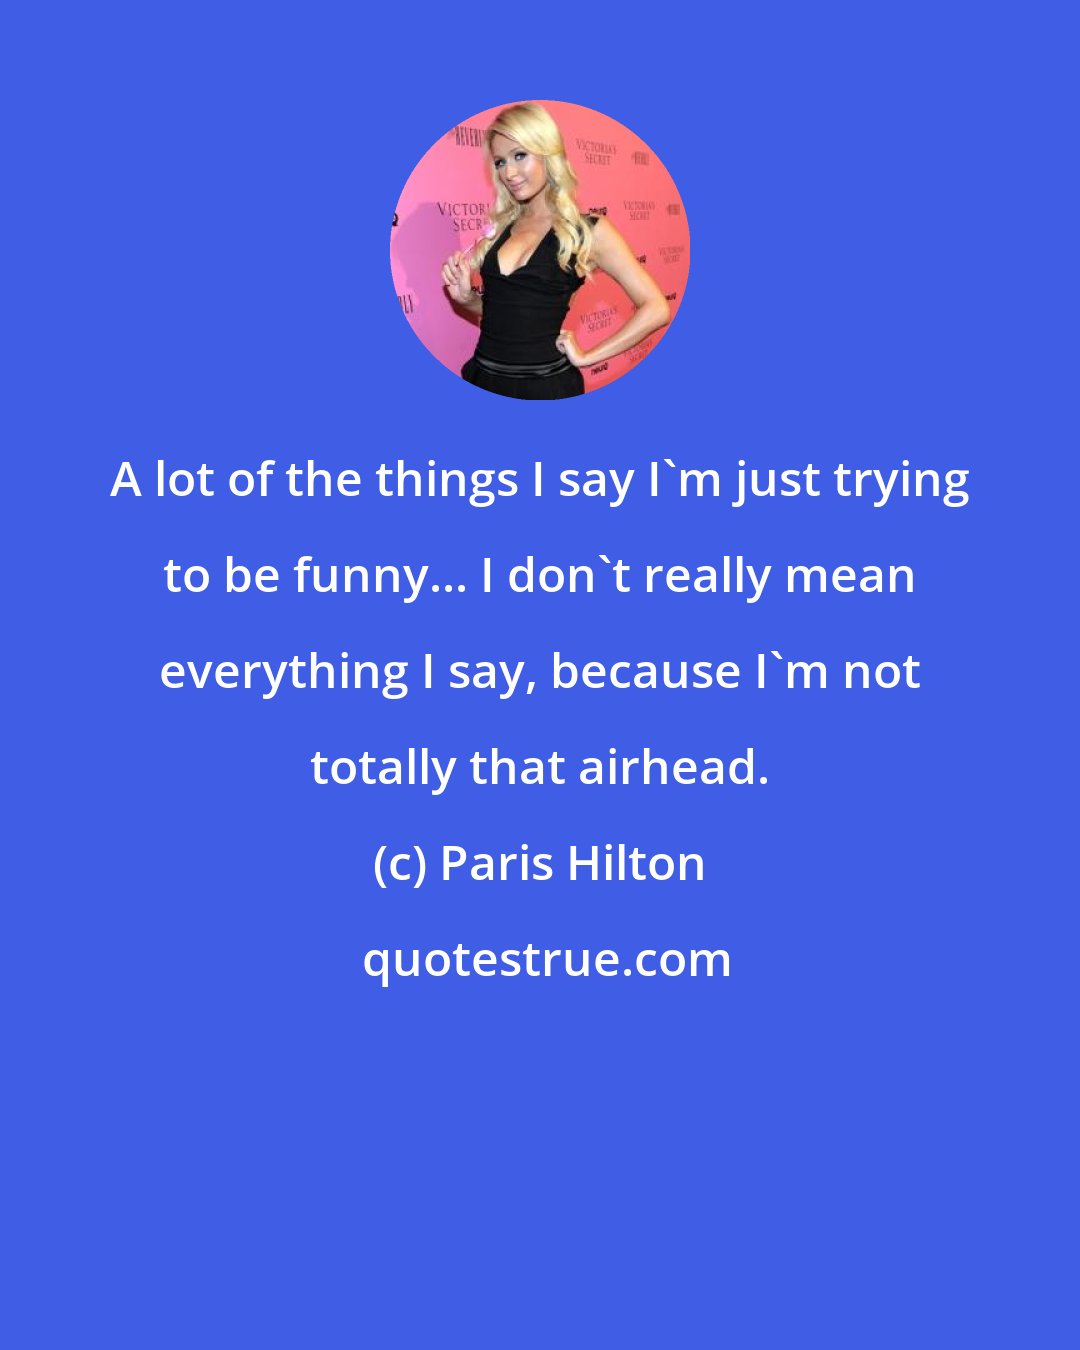 Paris Hilton: A lot of the things I say I'm just trying to be funny... I don't really mean everything I say, because I'm not totally that airhead.